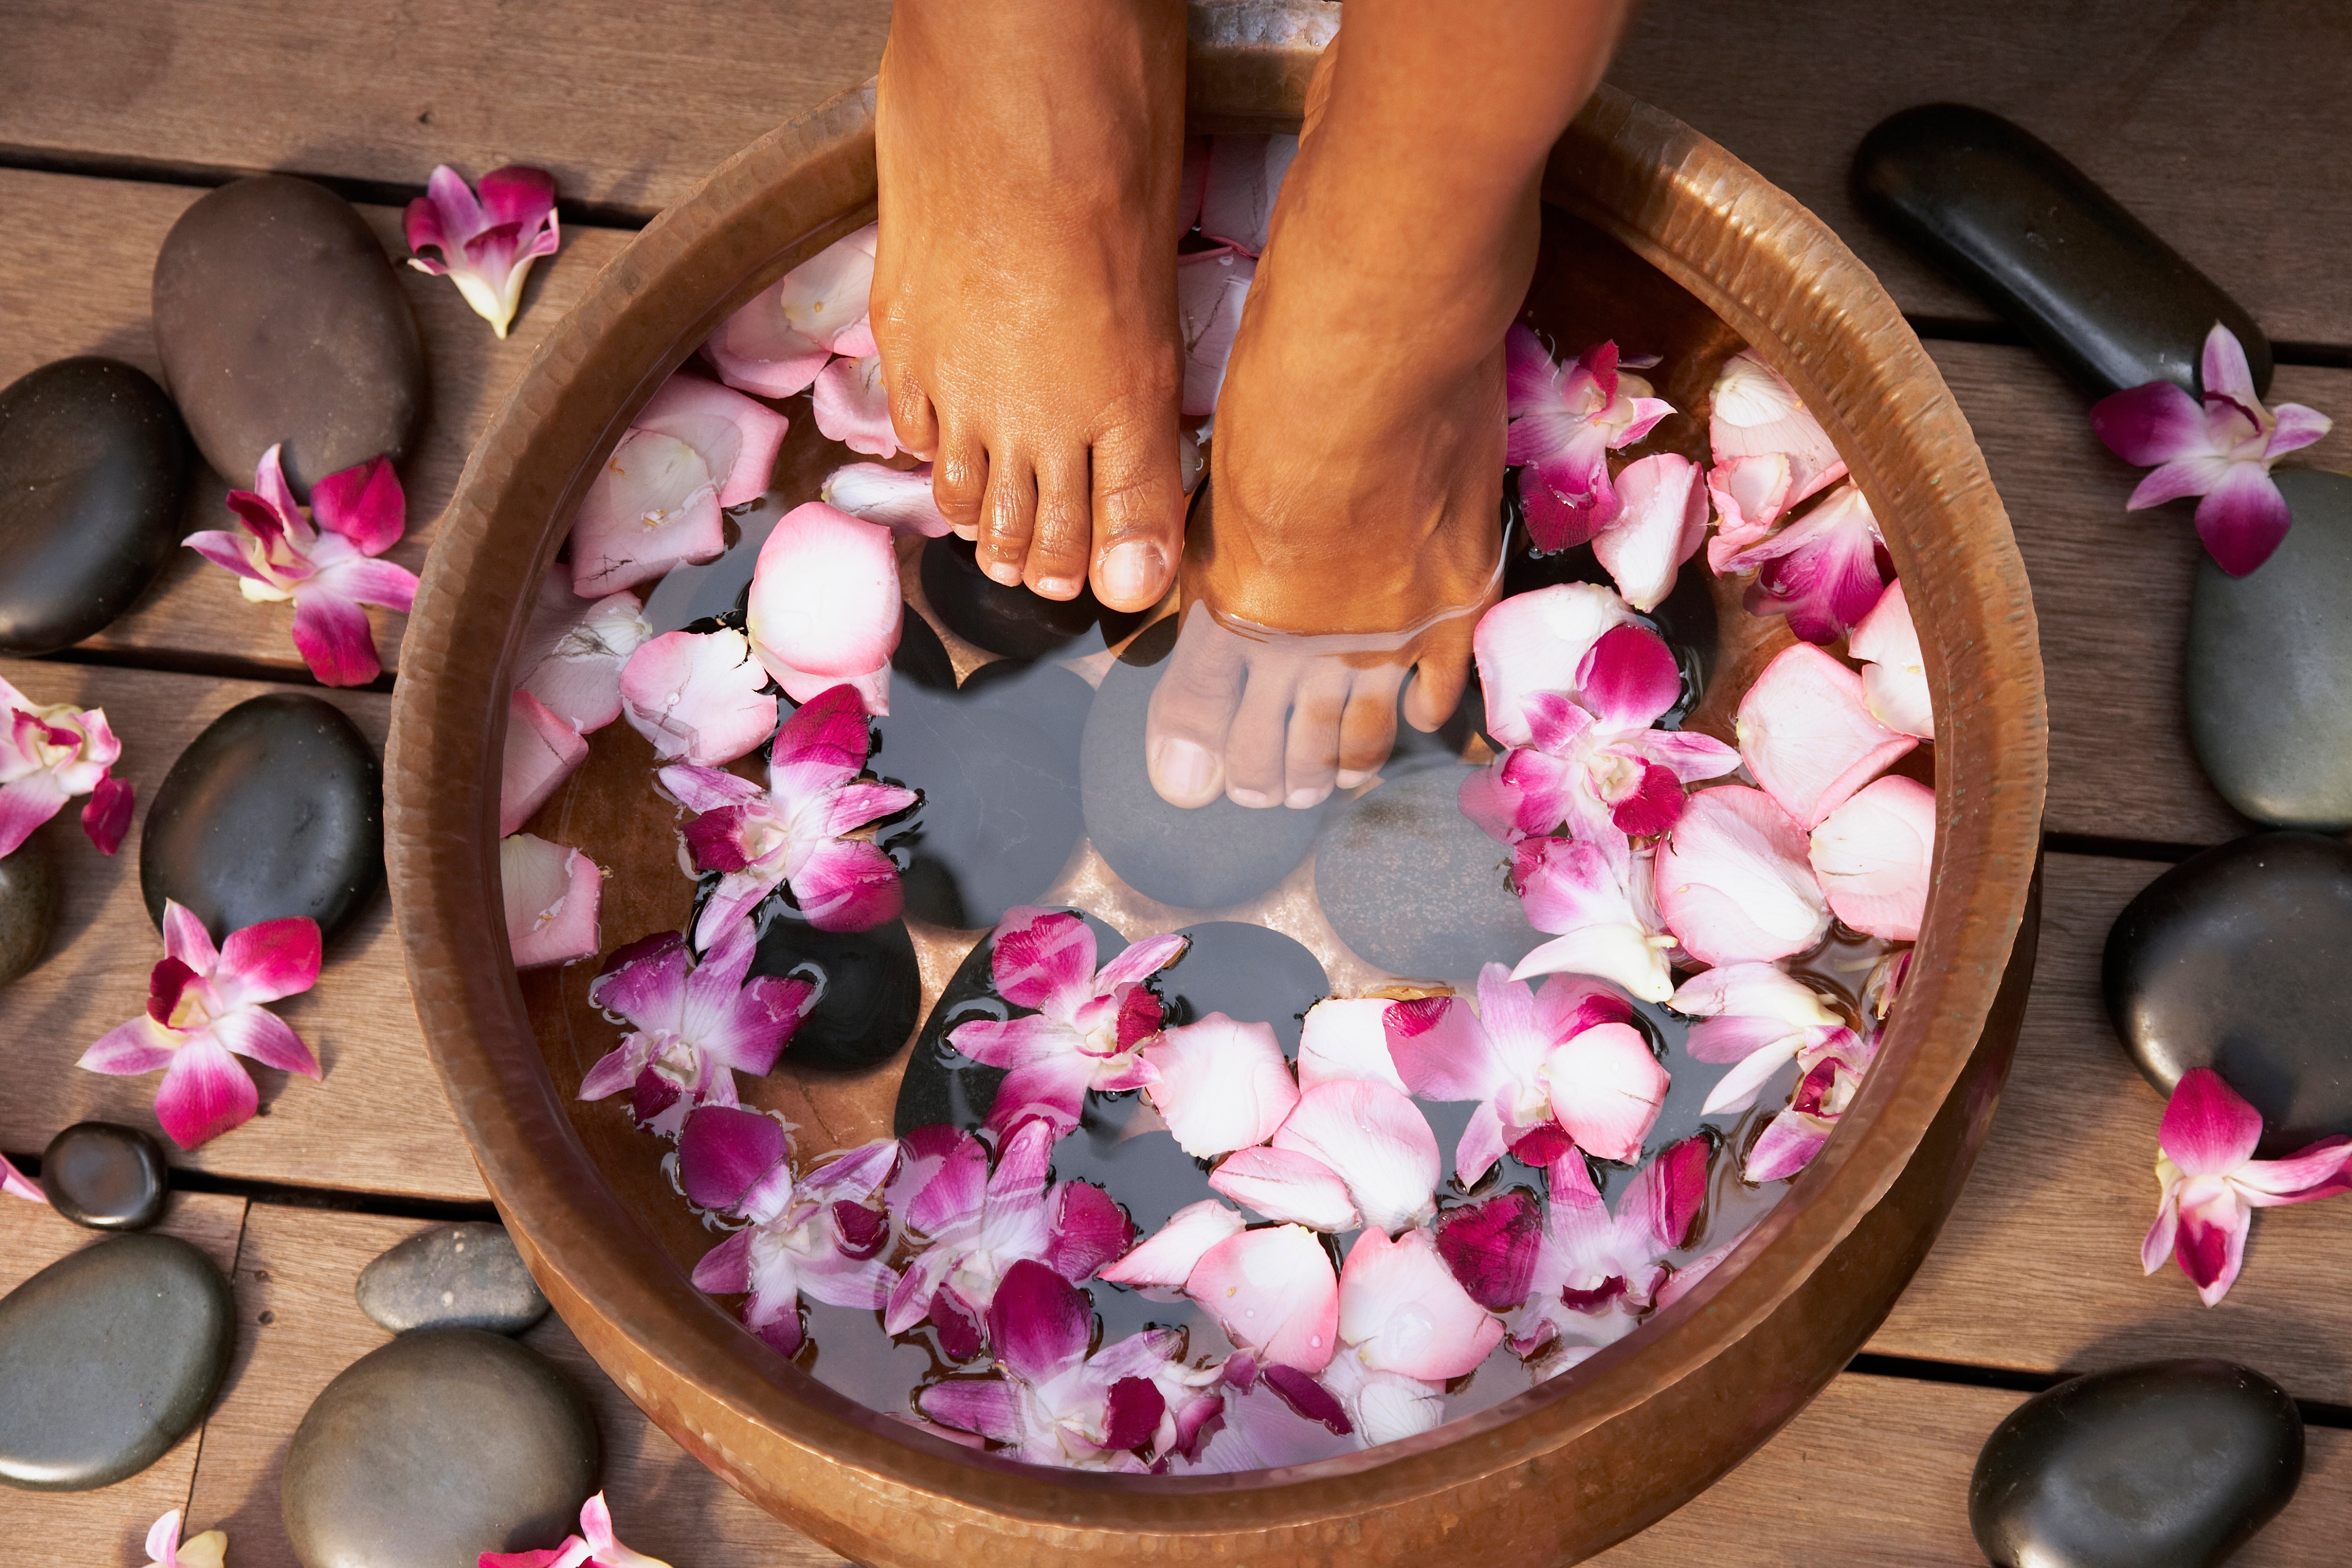 11 Beauty Products That Will Make Your Dry, Cracked Feet Baby Soft